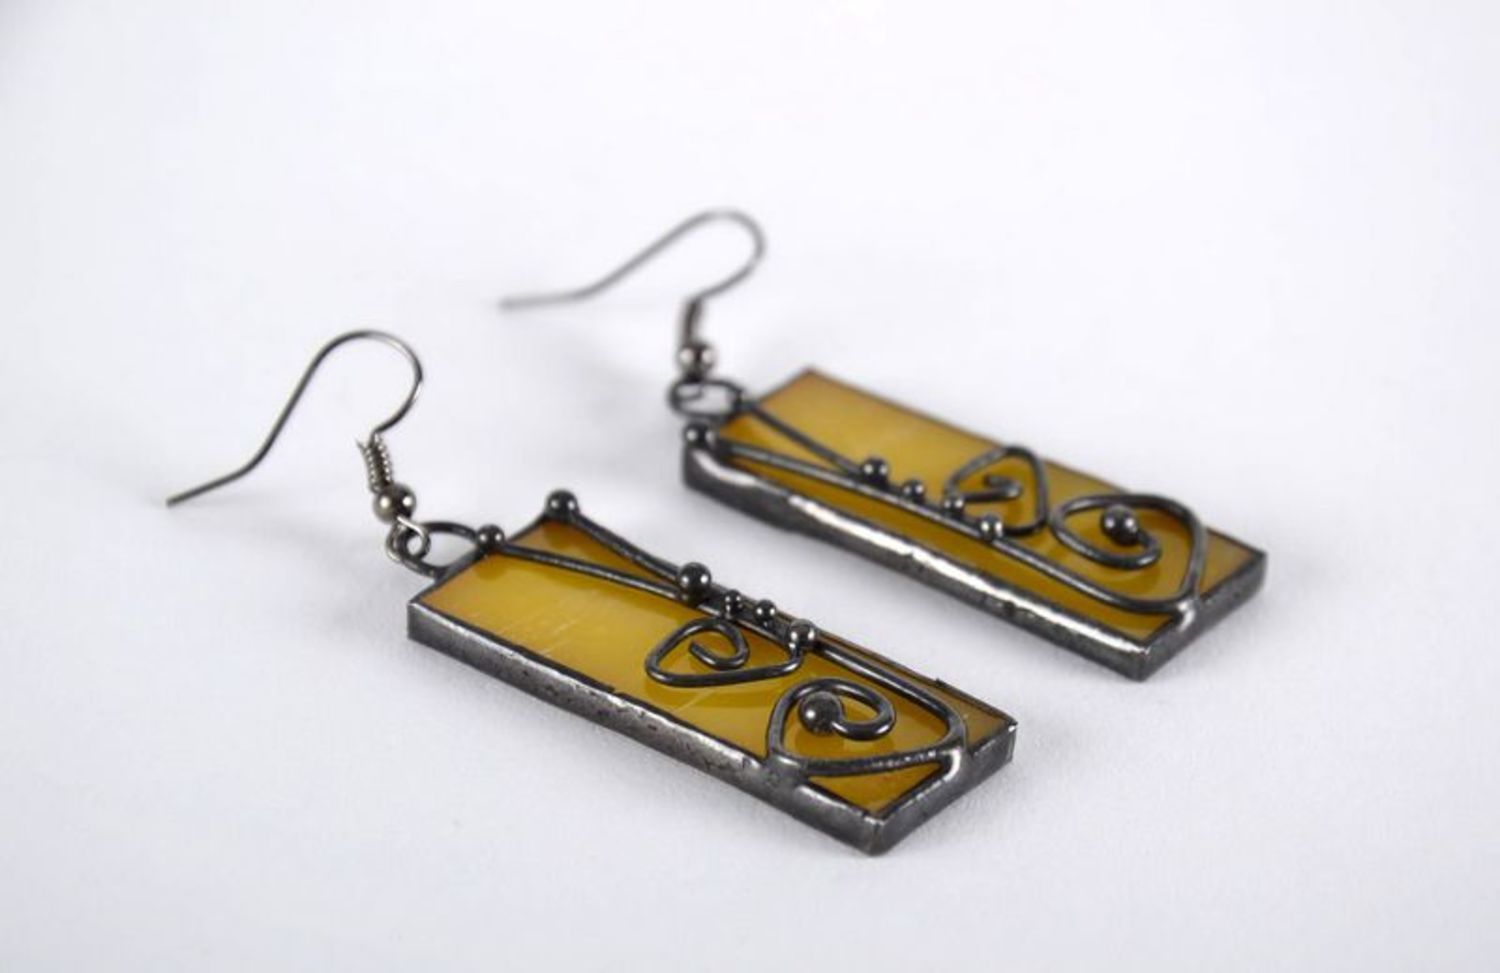 Stained glass earrings made of copper and glass photo 1